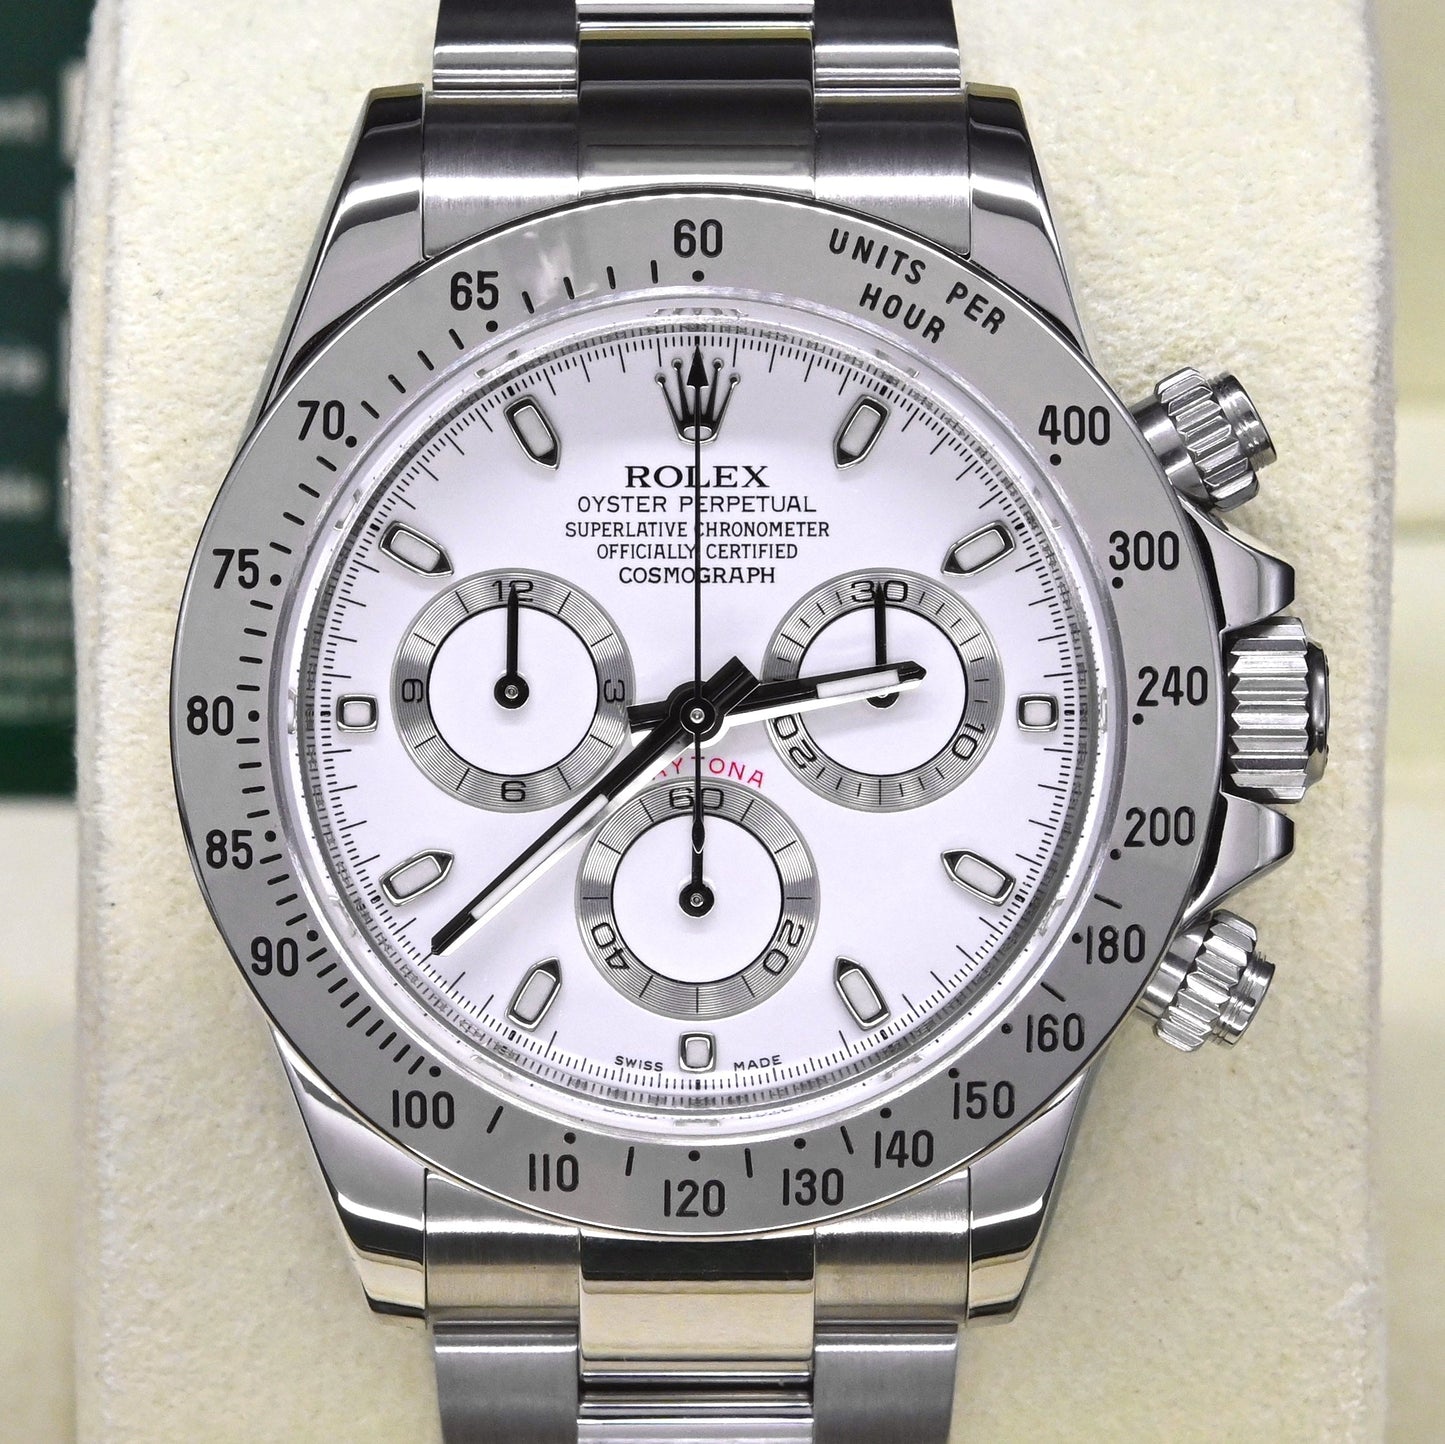 [New Old Stock] Rolex Cosmograph Daytona 40mm 116520 White Dial (Out of Production)